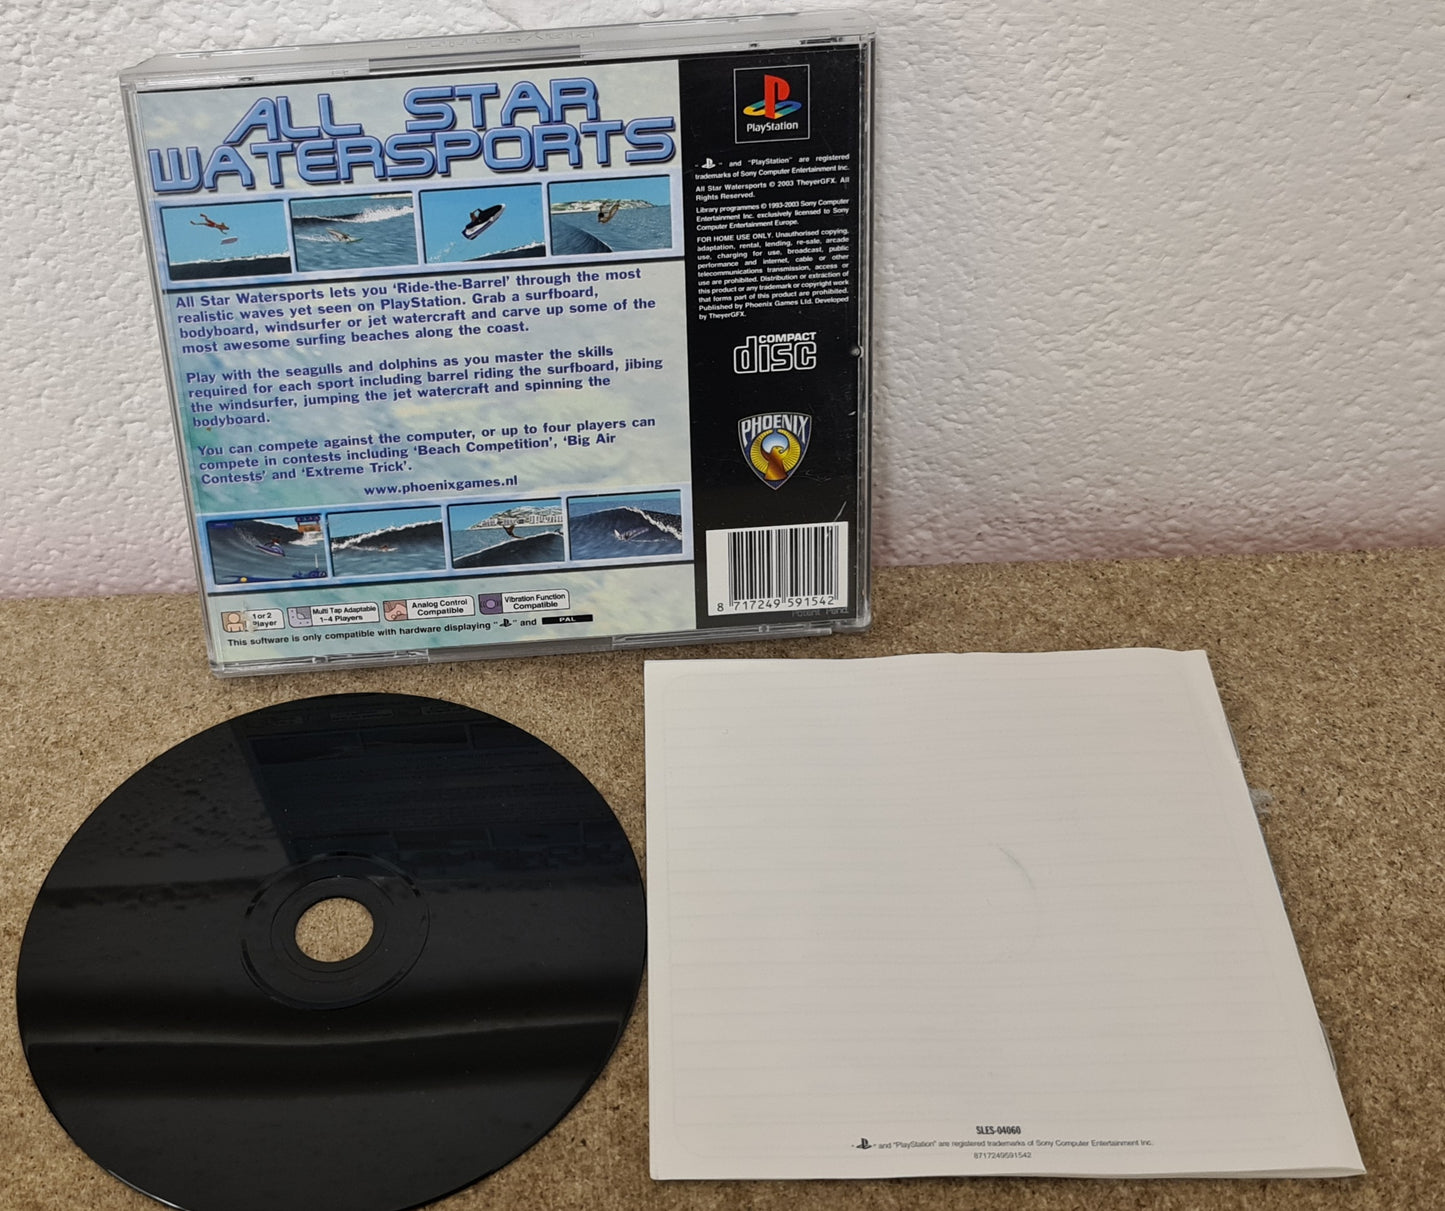 All Star Watersports Sony Playstation 1 (PS1) Game